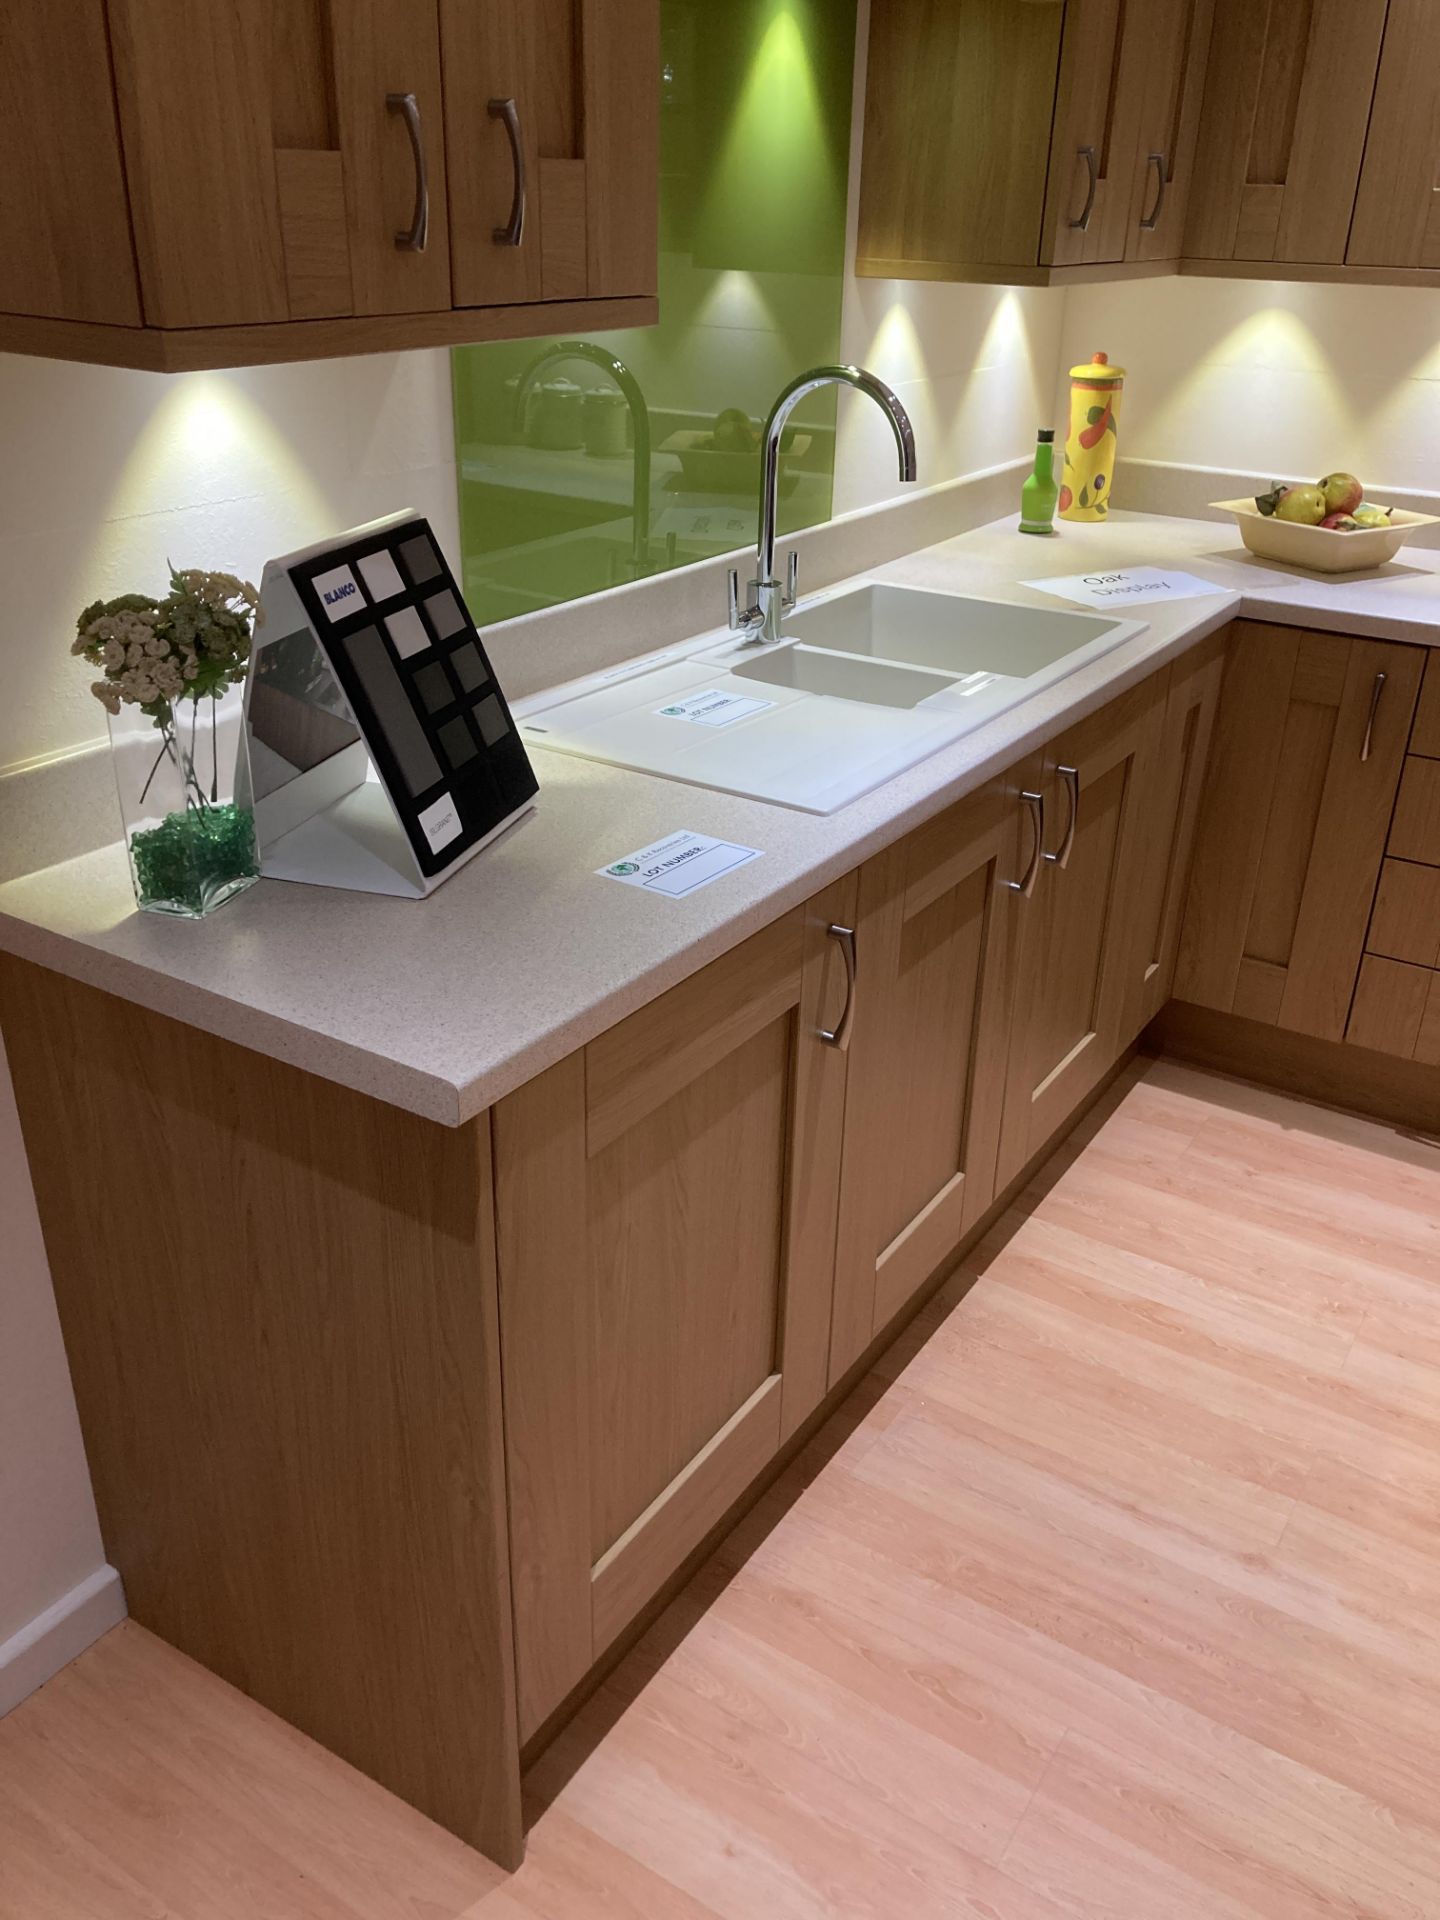 Oak display kitchen with Blanco double sink and tap - Image 2 of 8